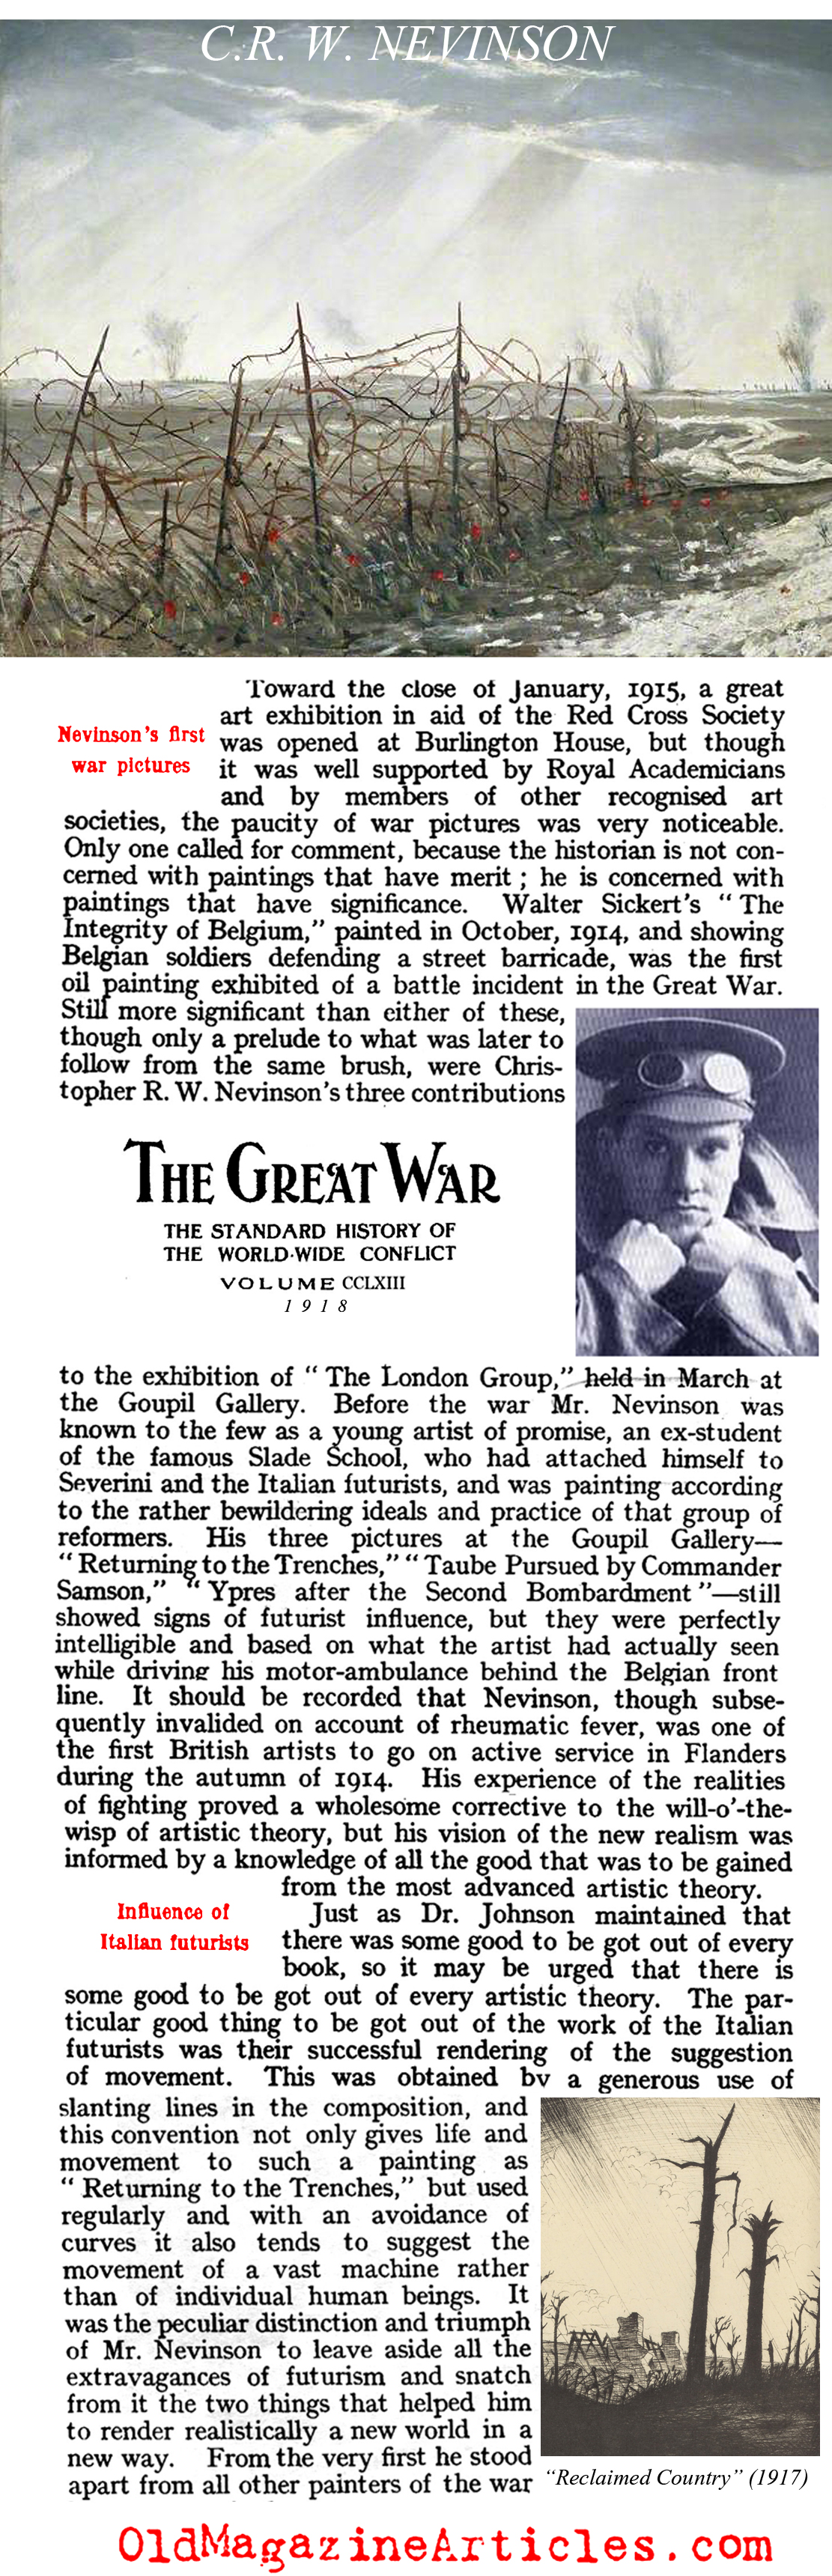 C.R.W. Nevinson: Futurist on the Front (The Great War, 1918)